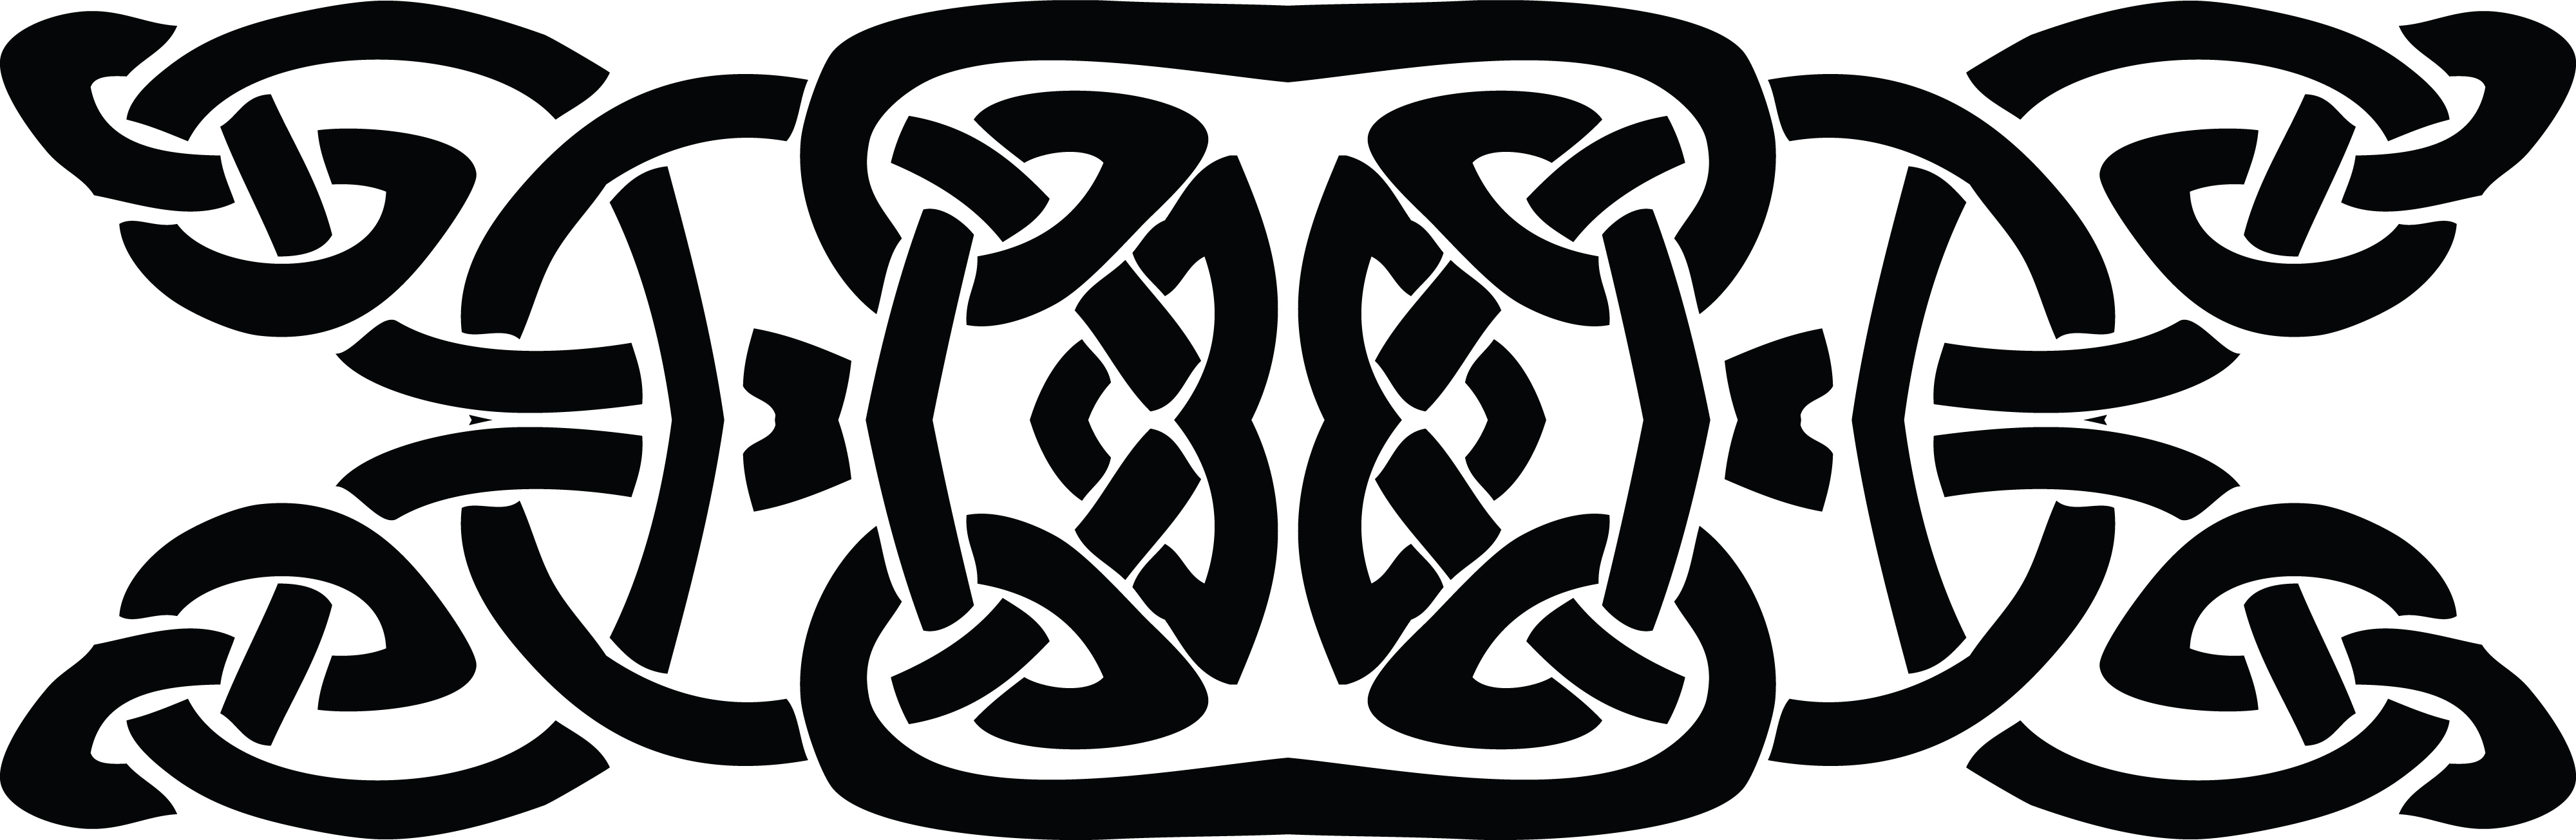 Free Clipart of a black and white celtic knot border.